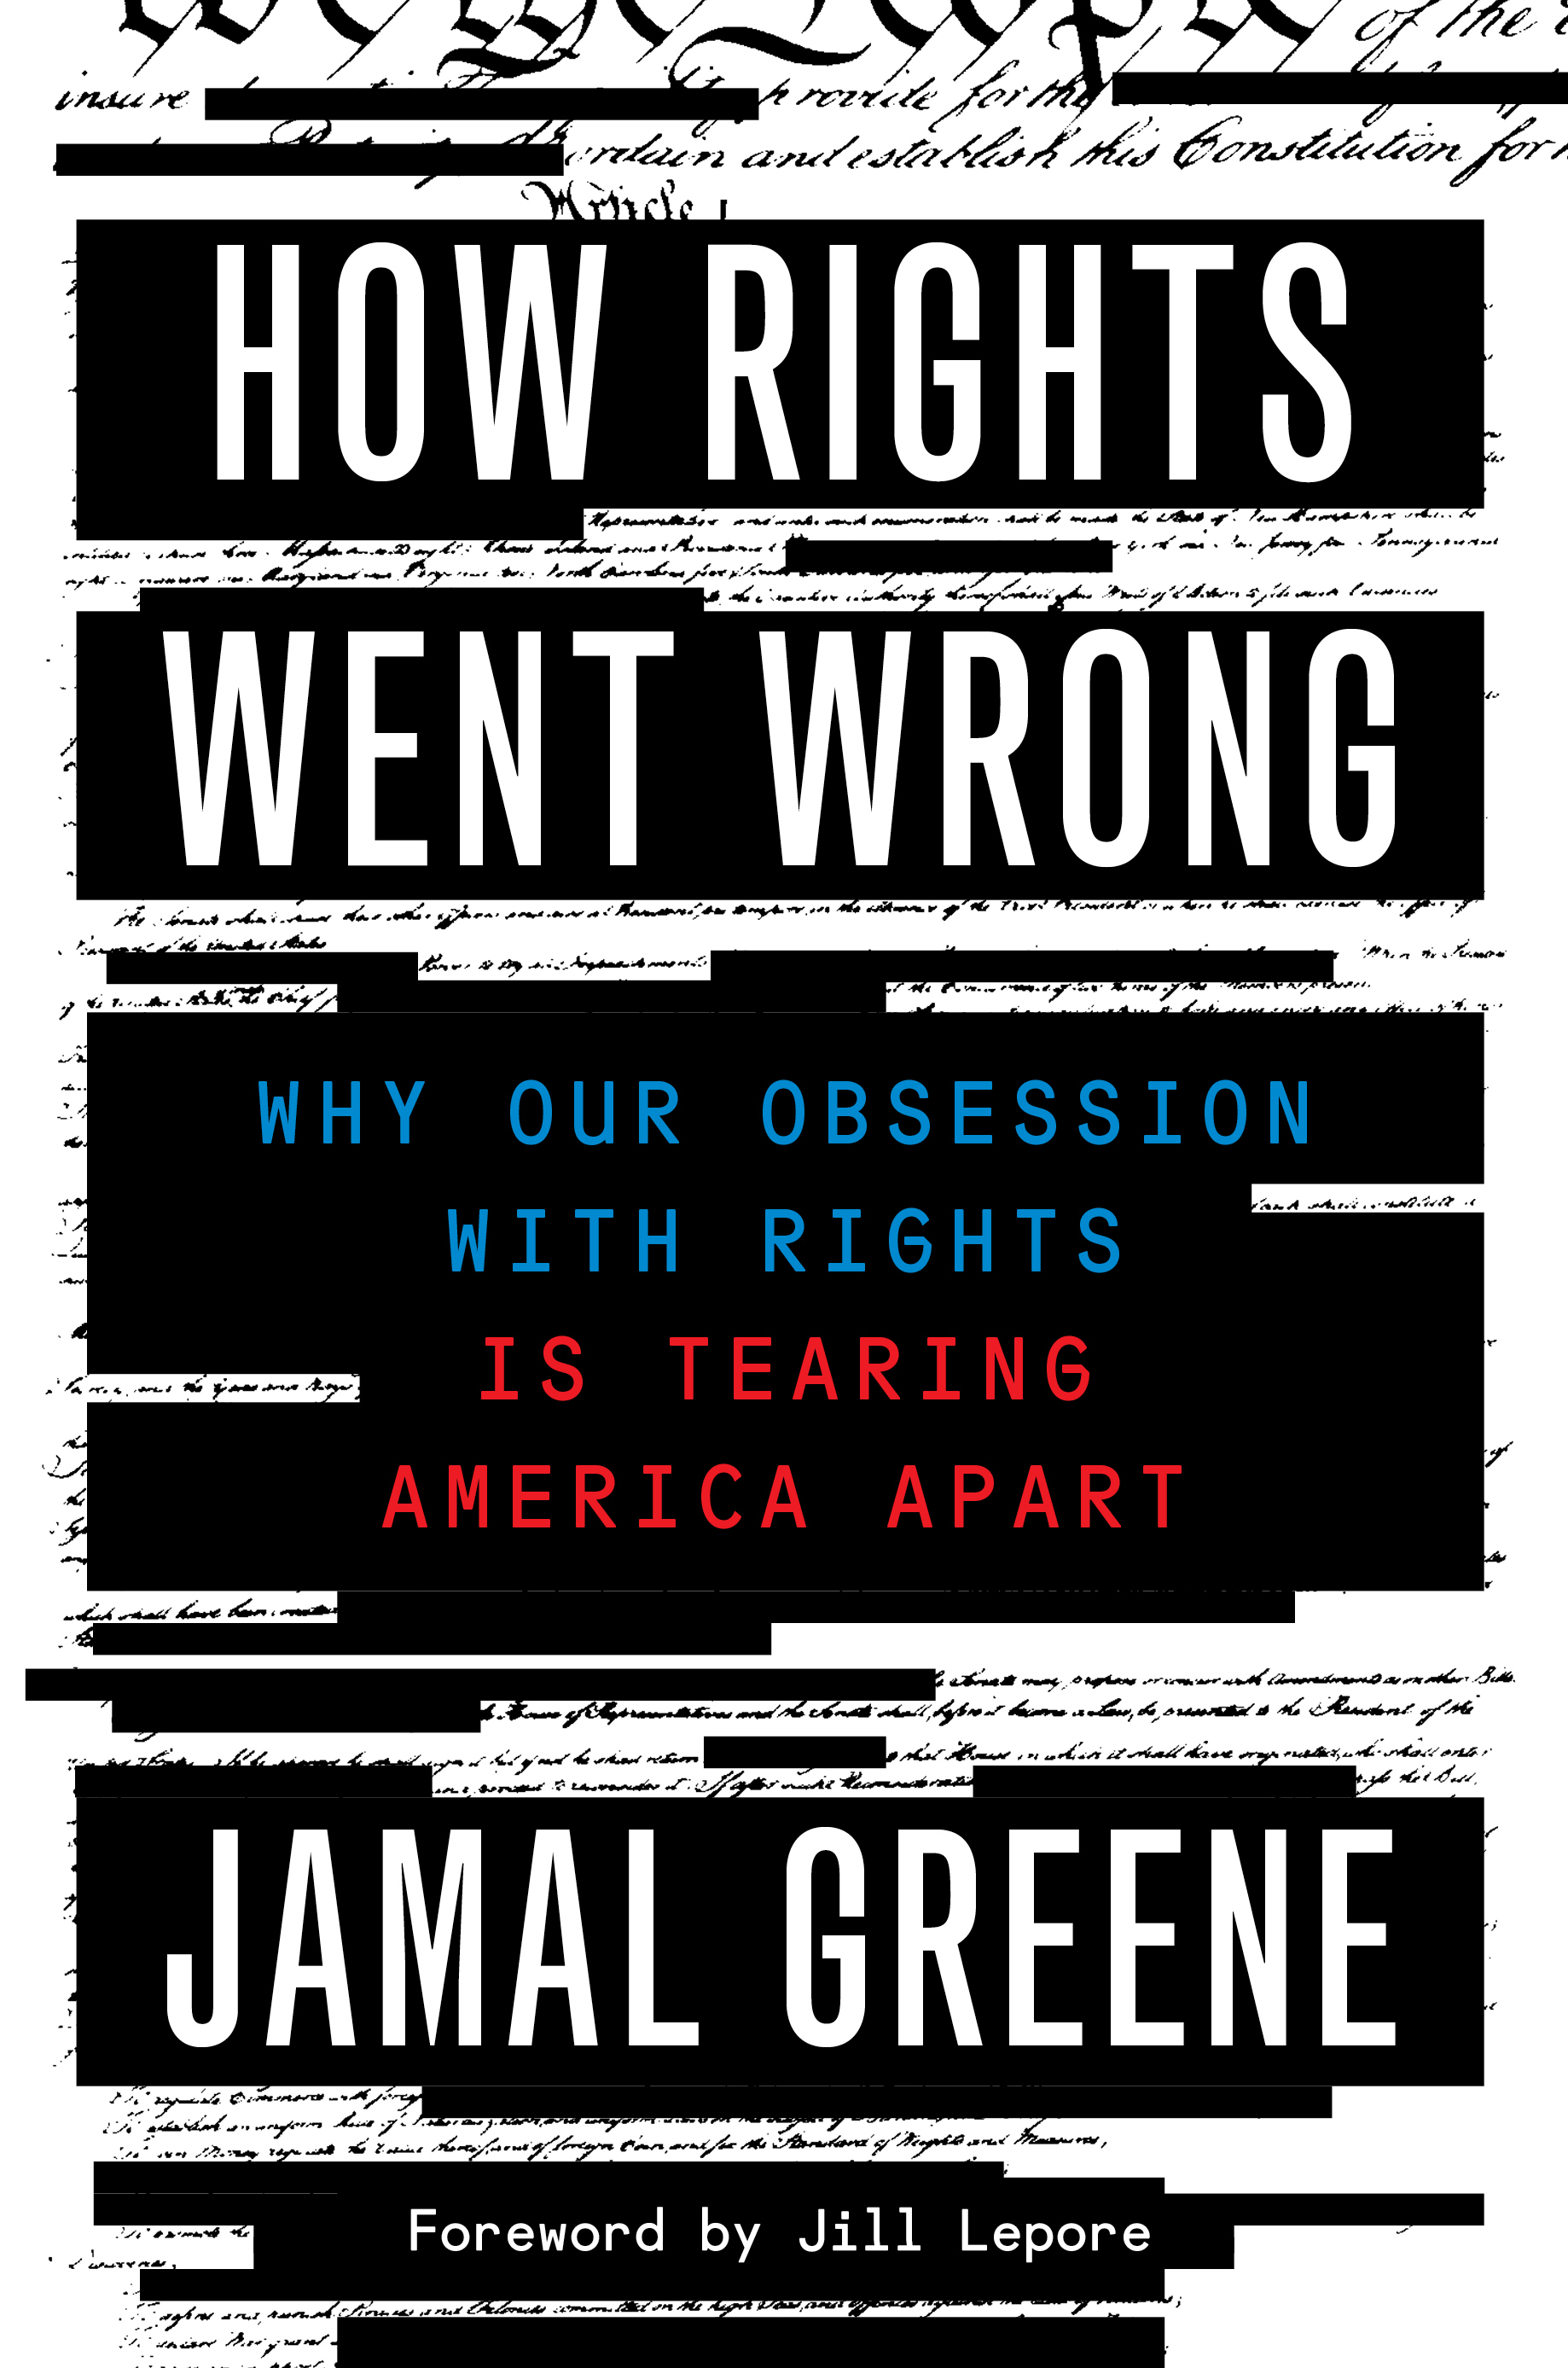 Mediating Rights: Anthony Sanders reviews Jamal Greene’s new book, How Rights Went Wrong